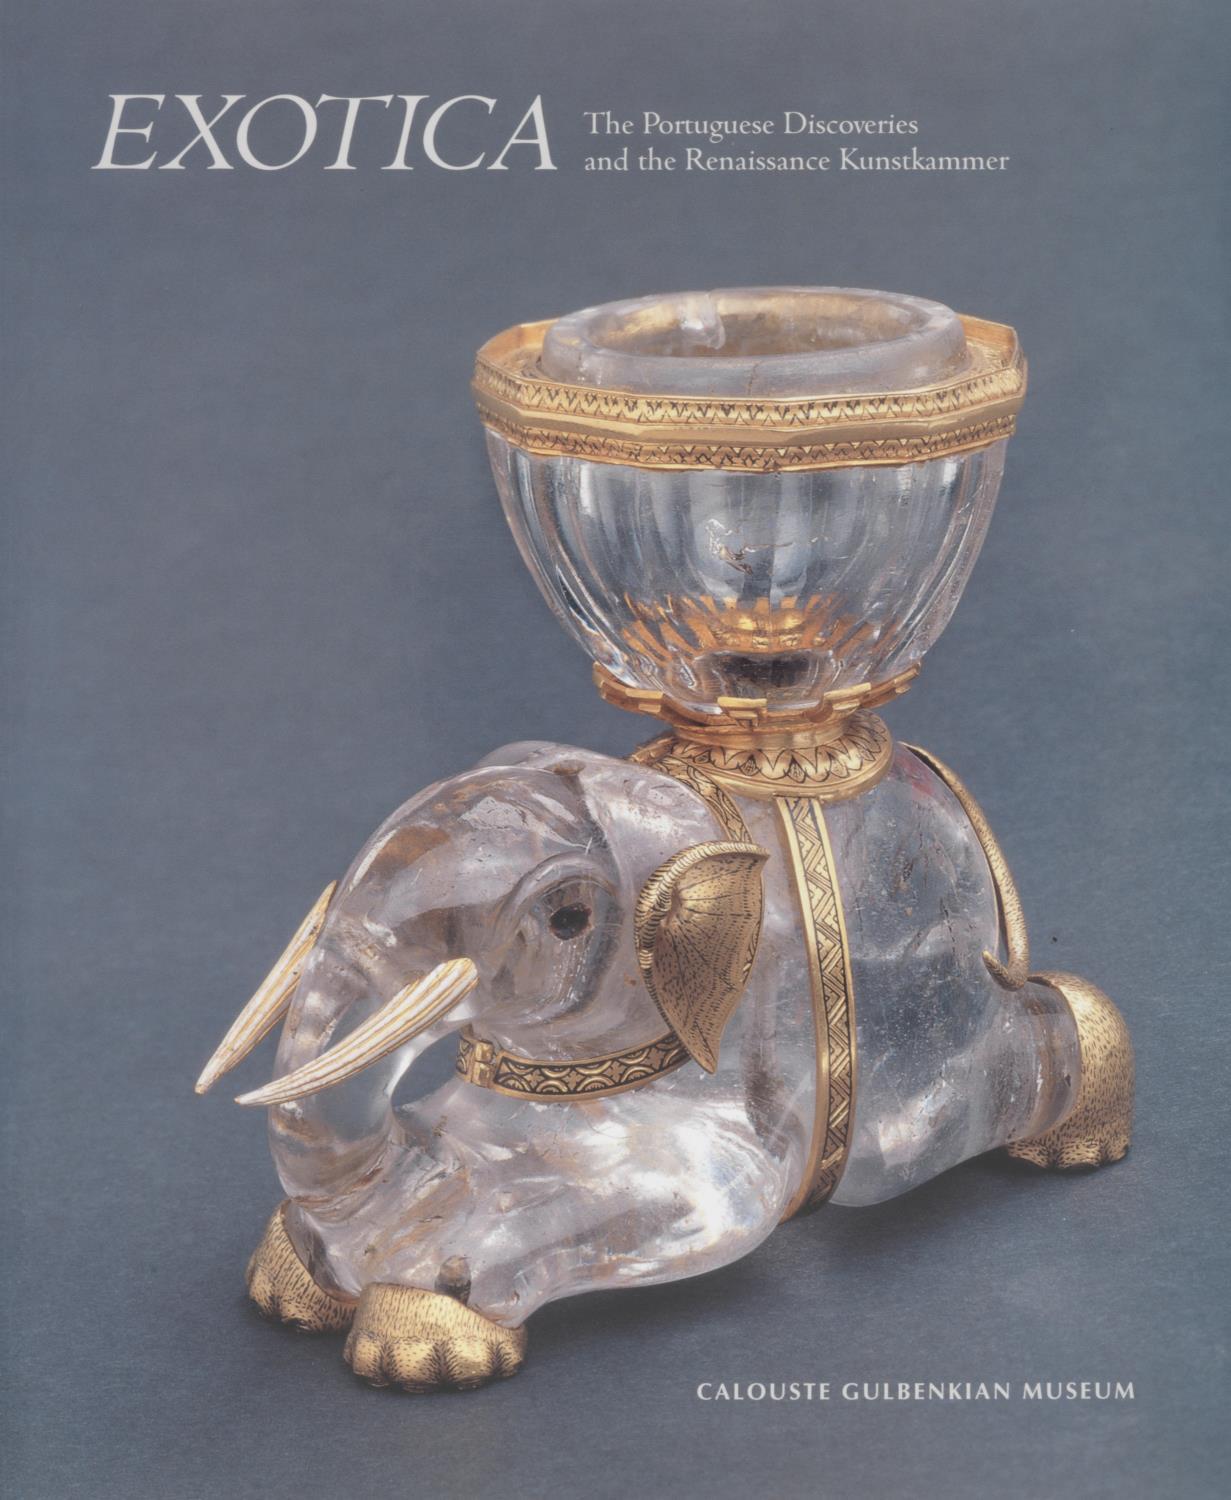 Exotica. The Portuguese Discoveries and the Renaissance Kunstkammer